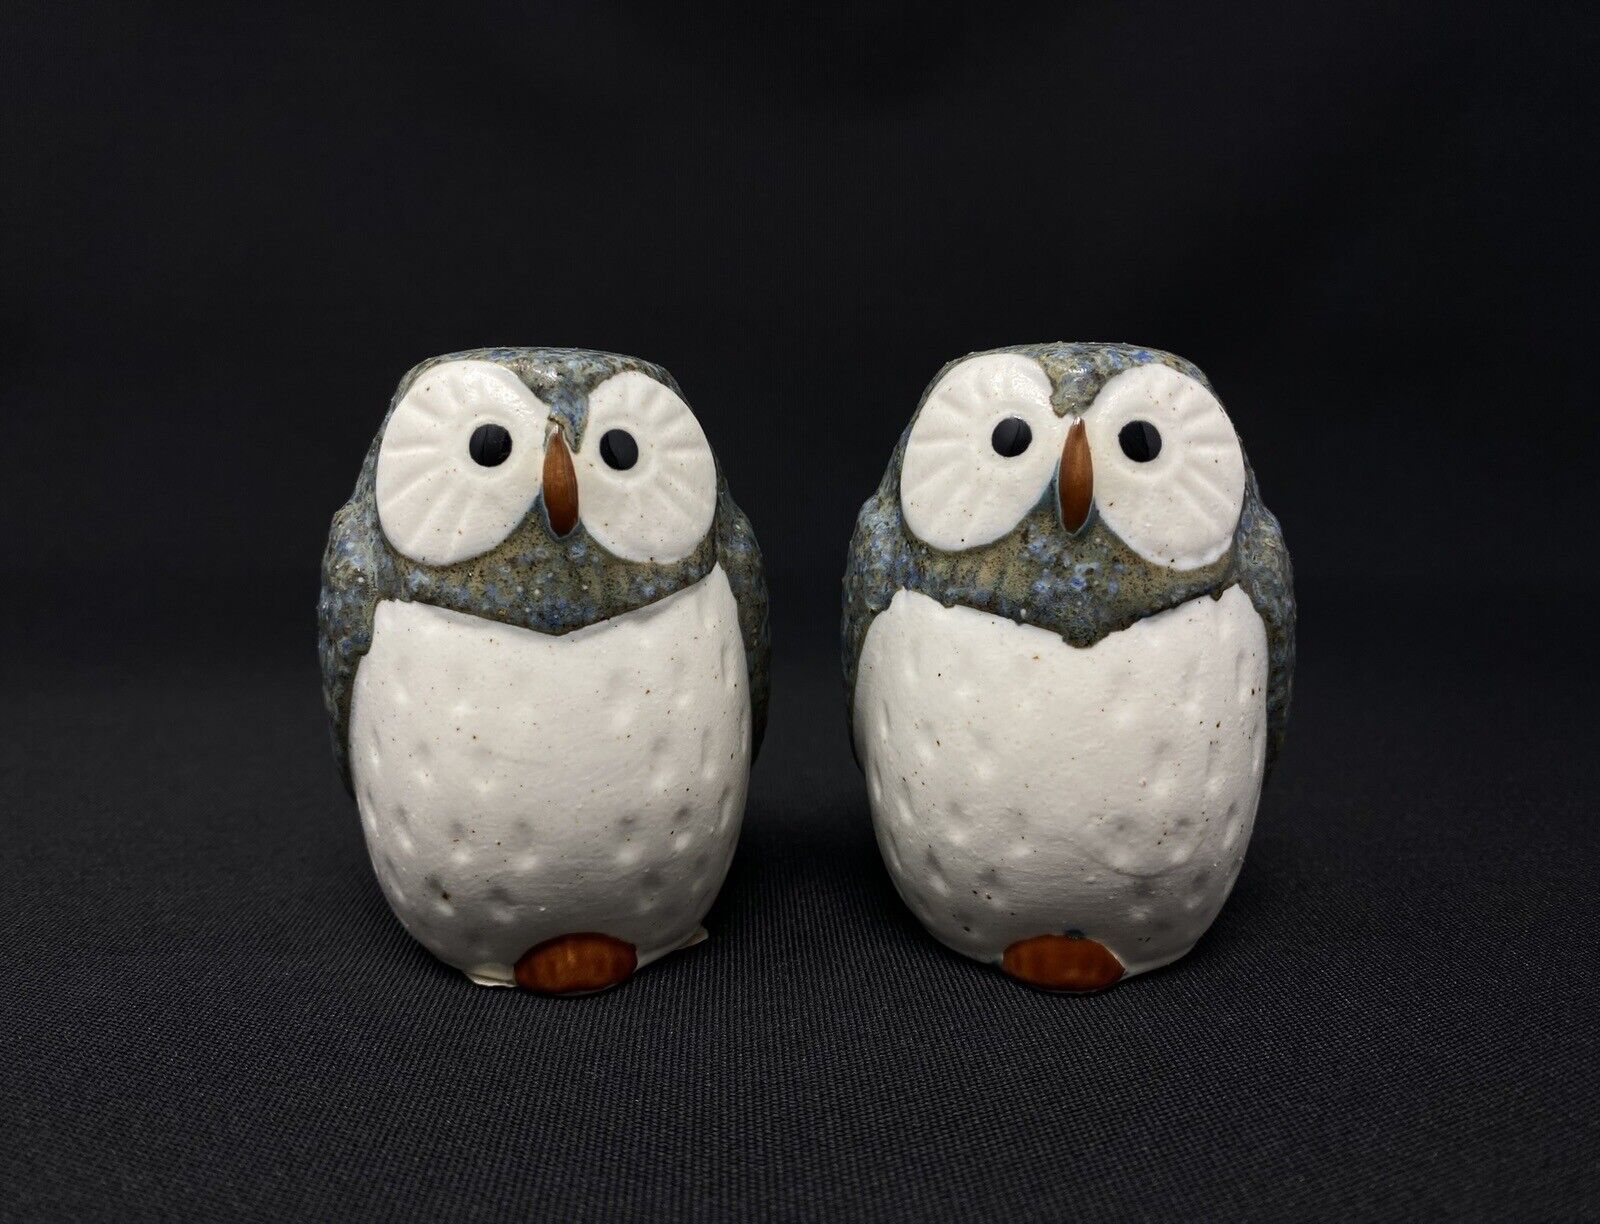 NEW Anthropologie Art Pottery Style Ceramic Owl Salt and Pepper Shakers